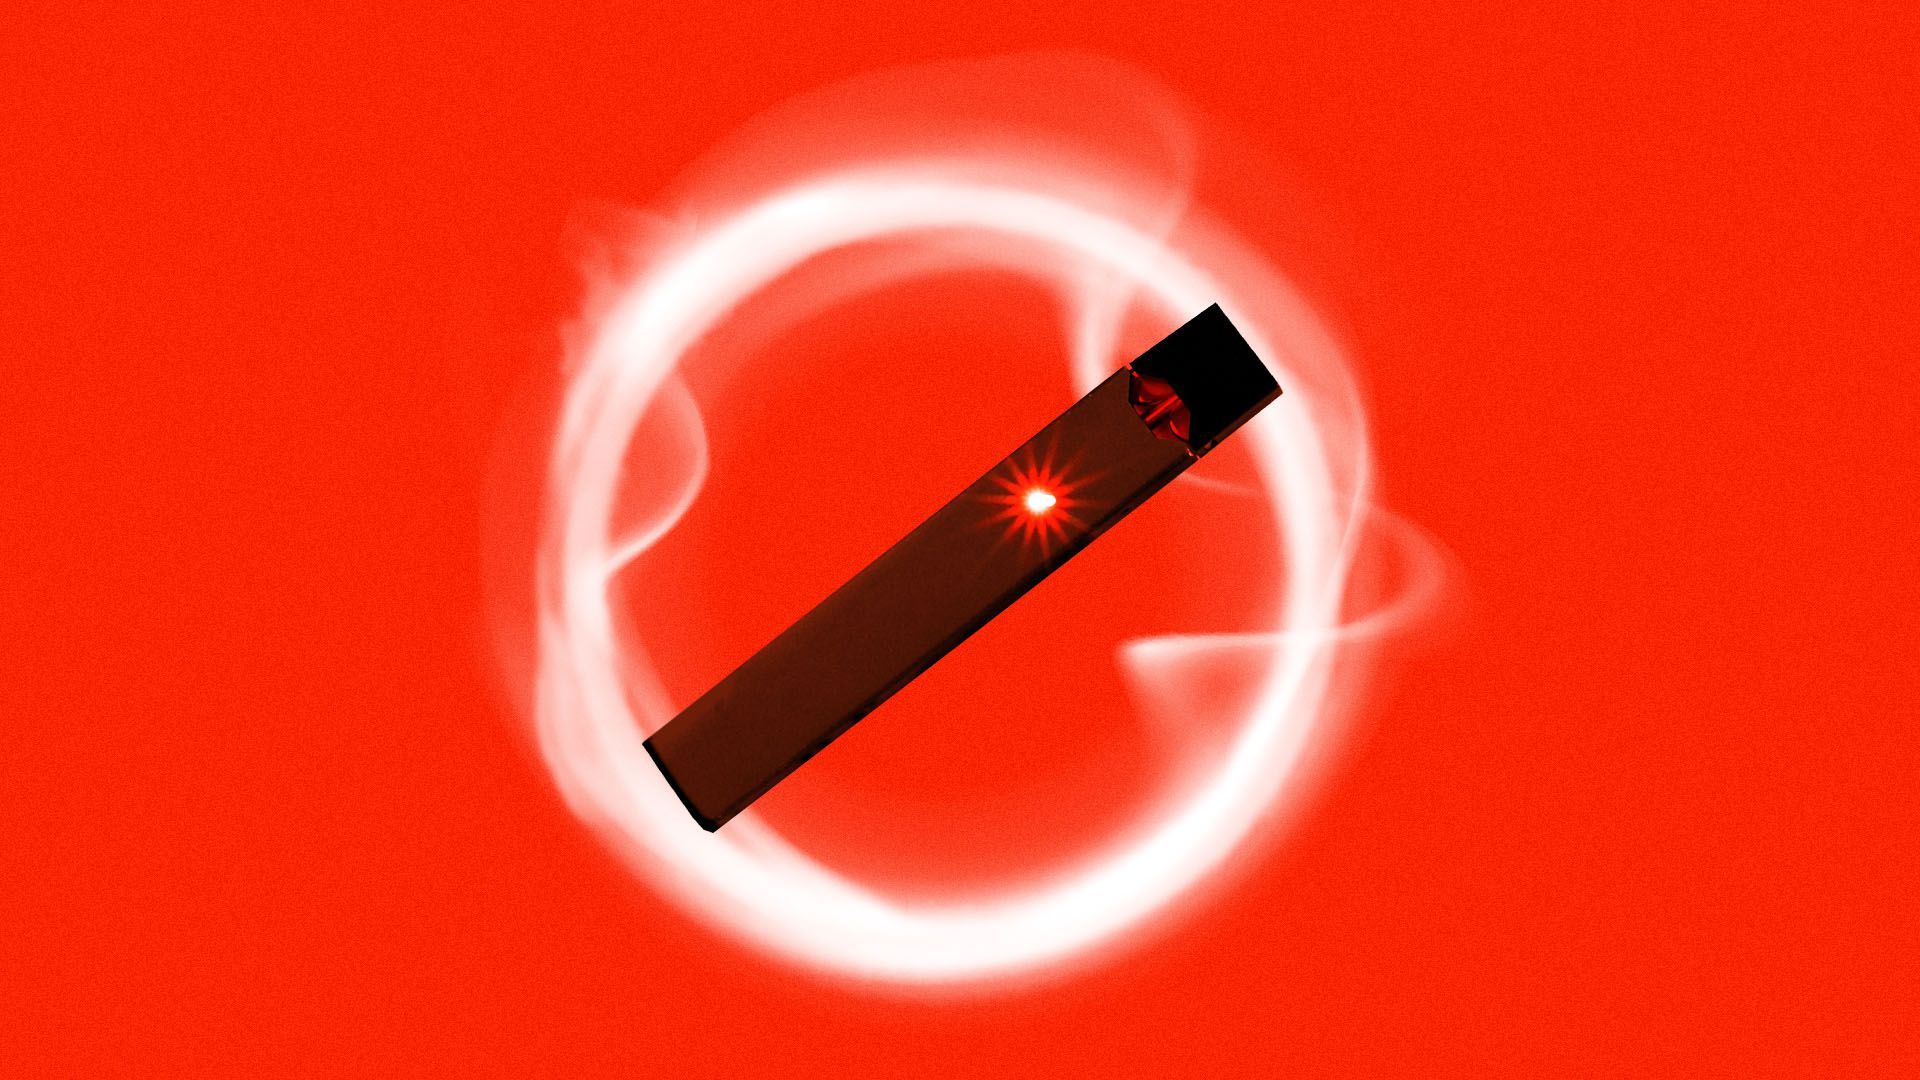 Illustration of a juul device forming a "no" symbol with a cloud of vapor around it